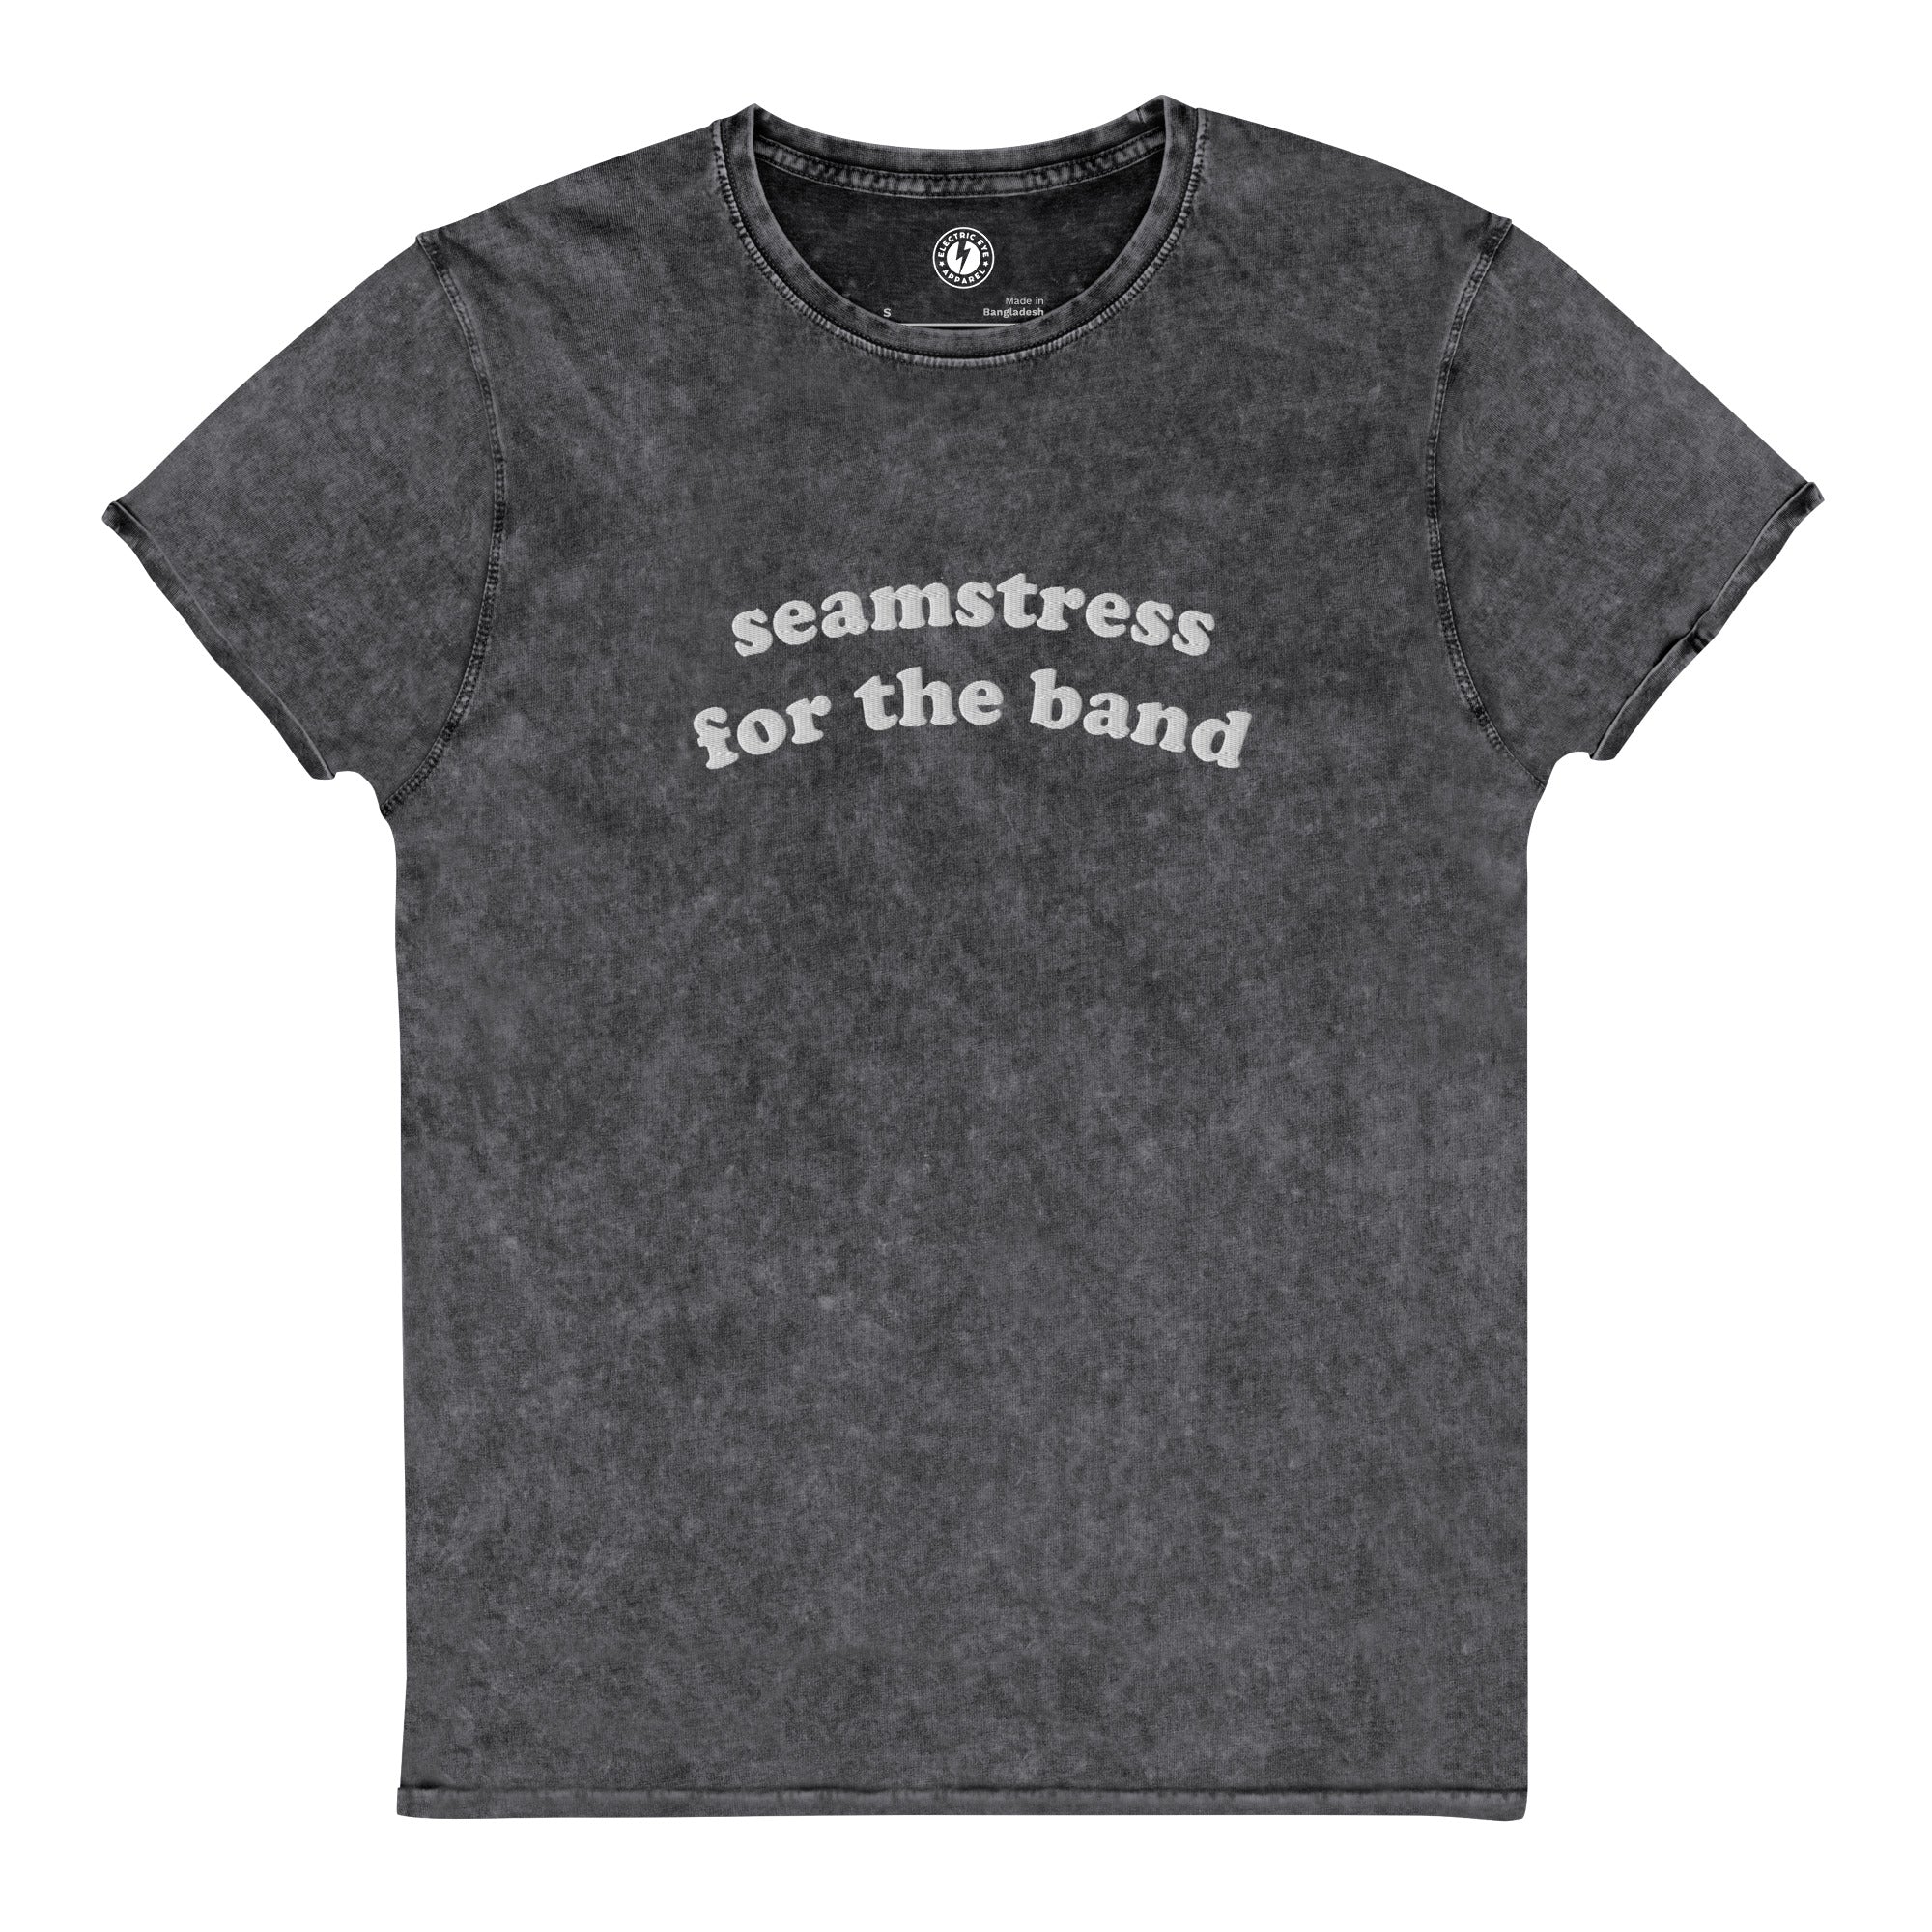 SEAMSTRESS FOR THE BAND embroidered Vintage Aged Denim Style Unisex T-Shirt